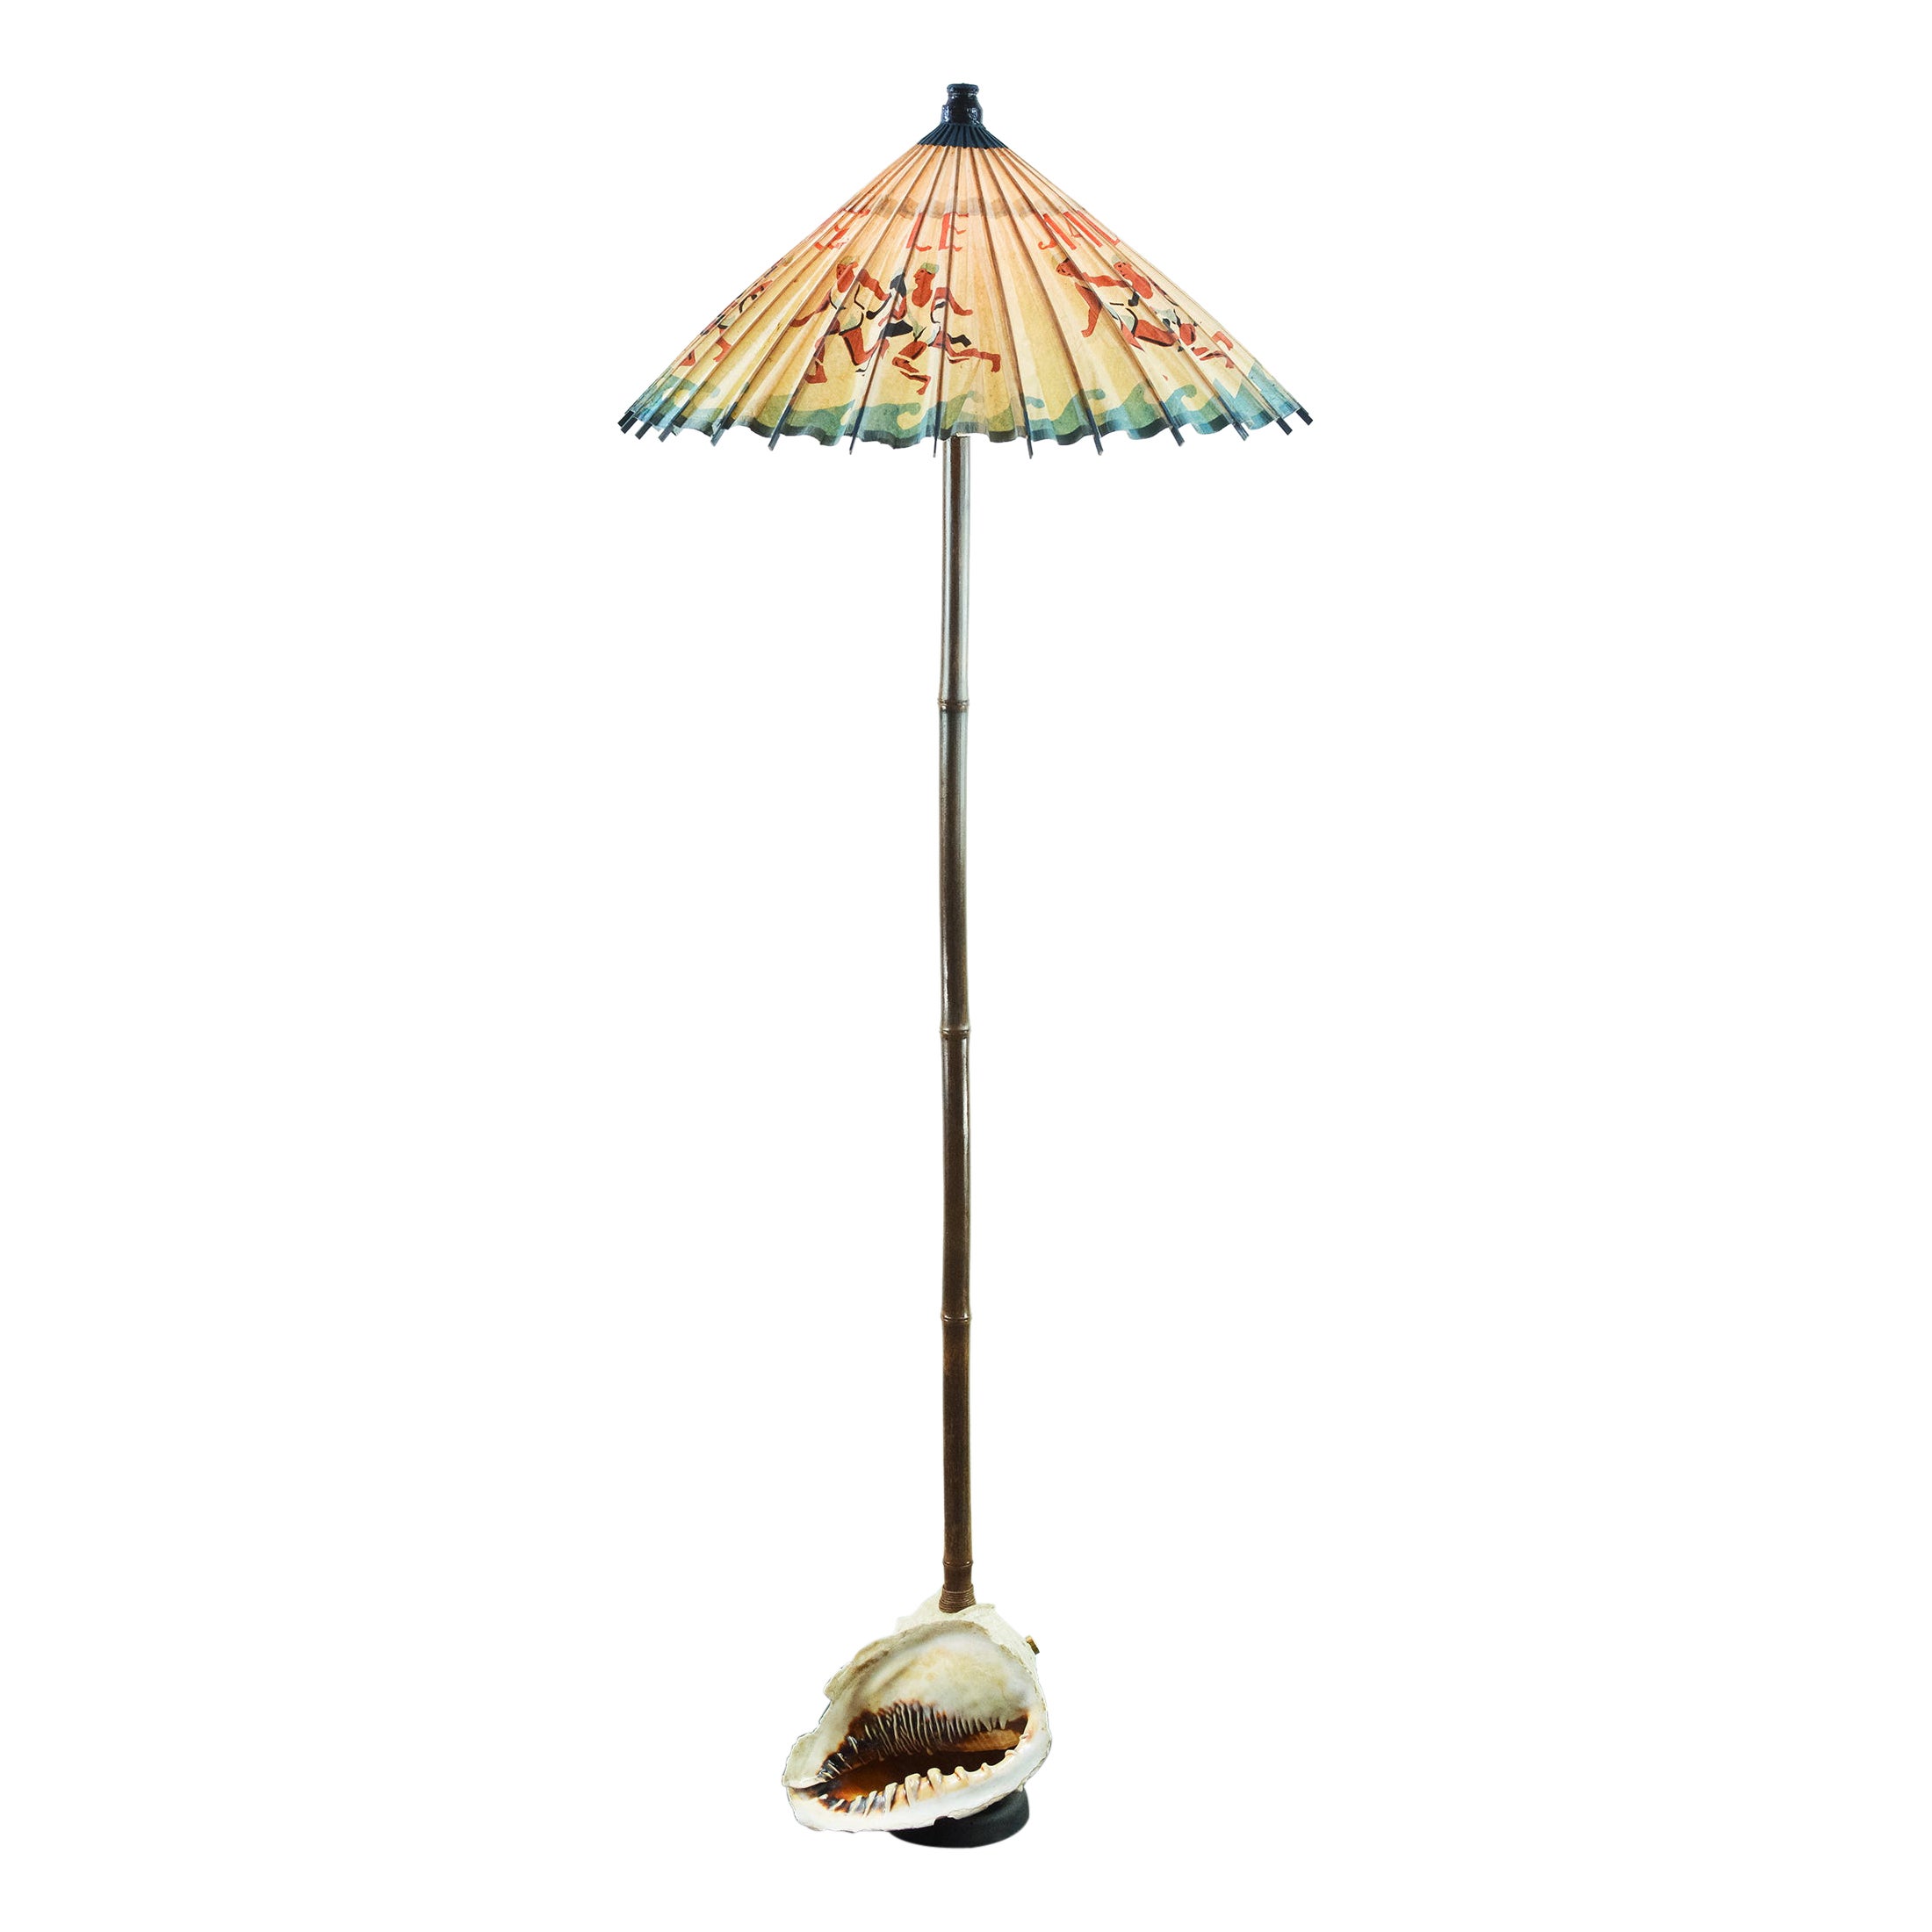 'Queen Helmet Conch Shell' Bamboo Floor Lamp with Vintage French Parasol Shade For Sale